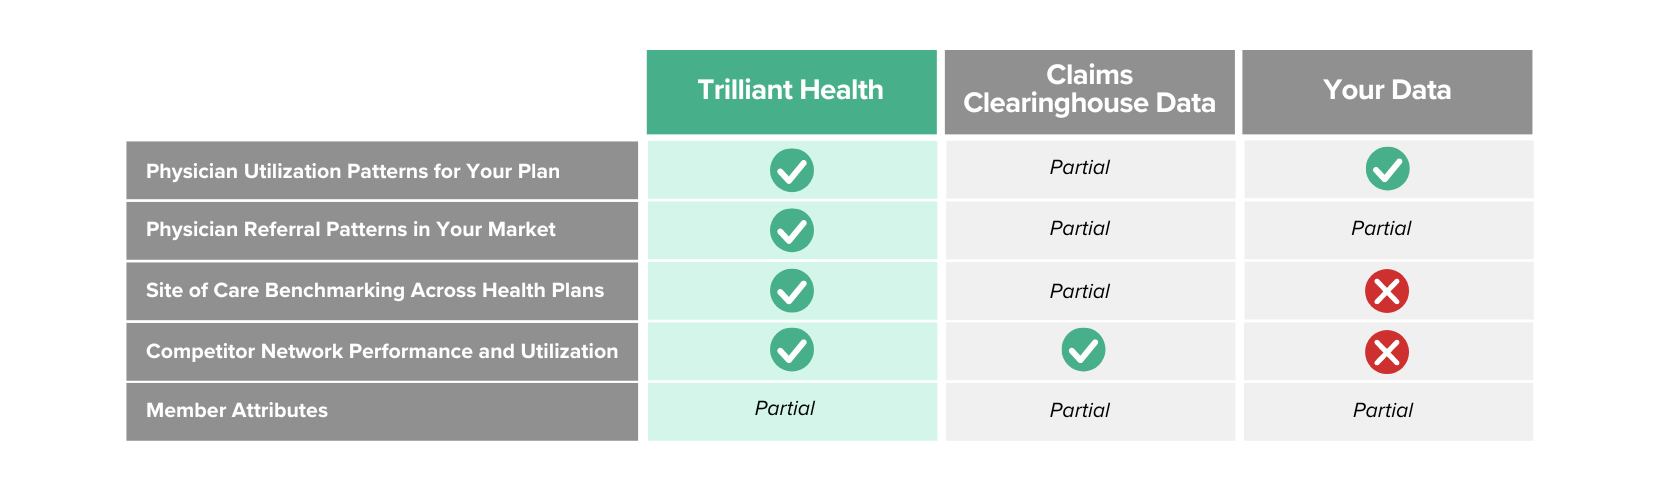 Chart comparing Trilliant Health vs. claims clearinghouse data and your own data